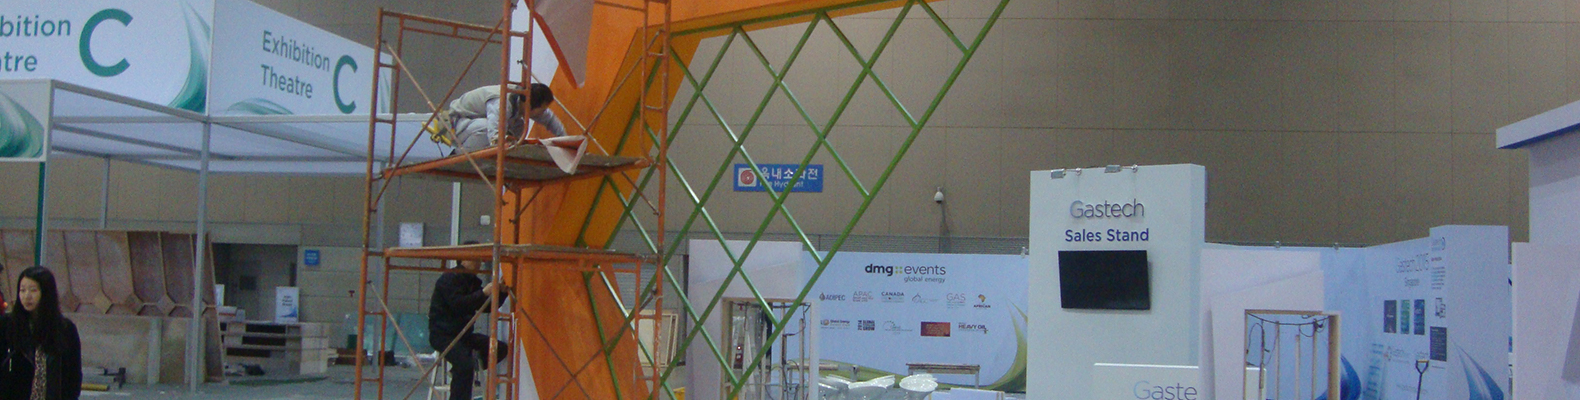 Exhibition-Stand-Construction-Site